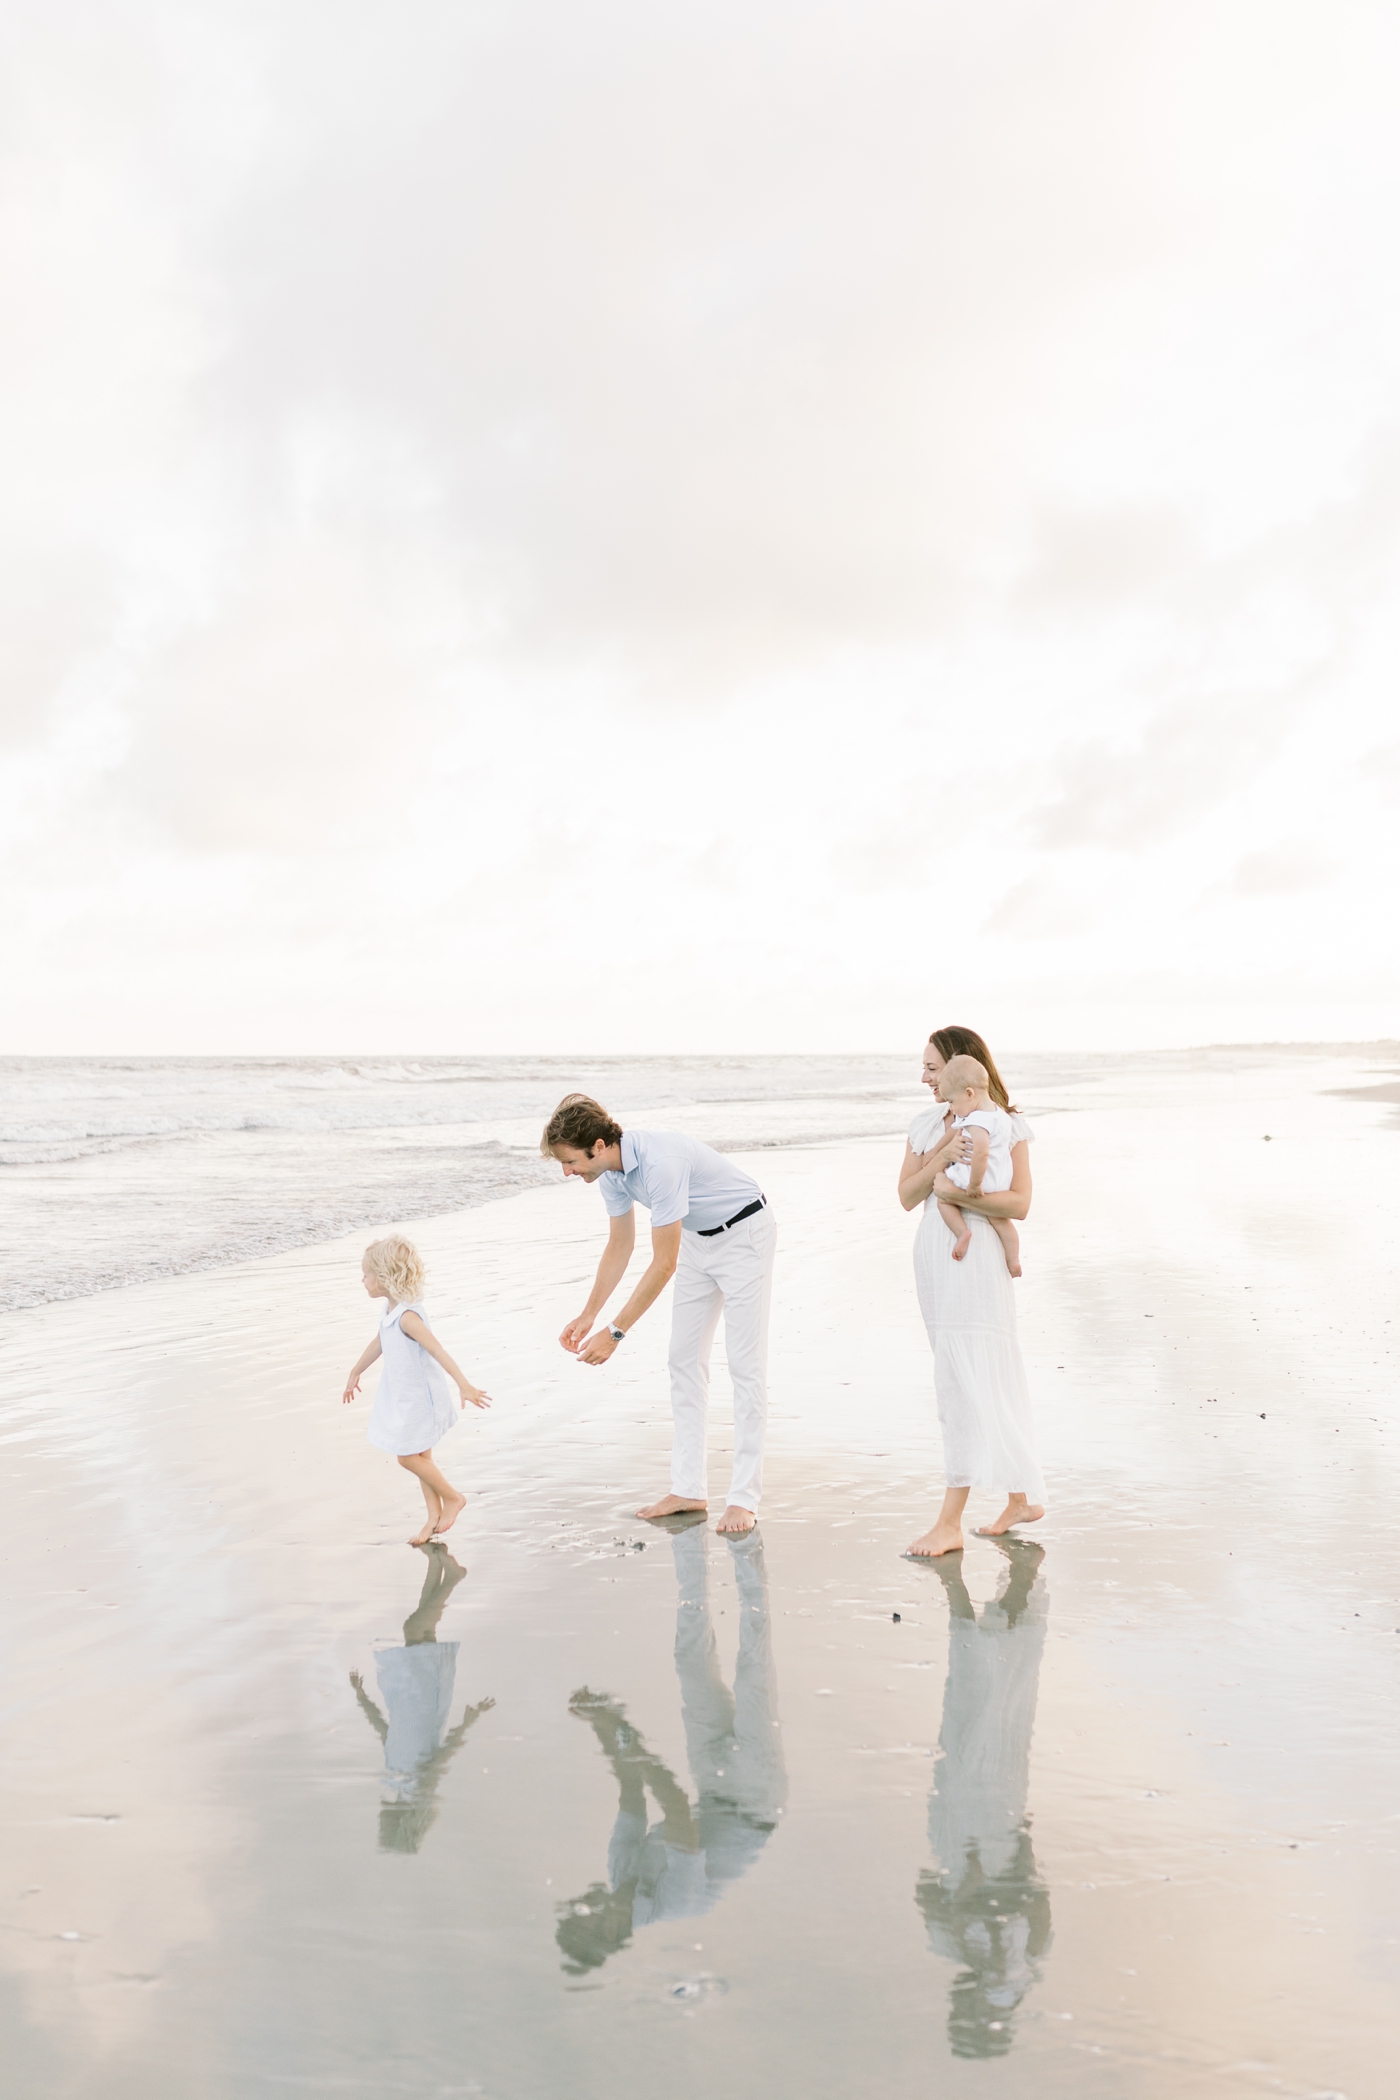 Family of four playing on the beach | Photo by Caitlyn Motycka Photography.